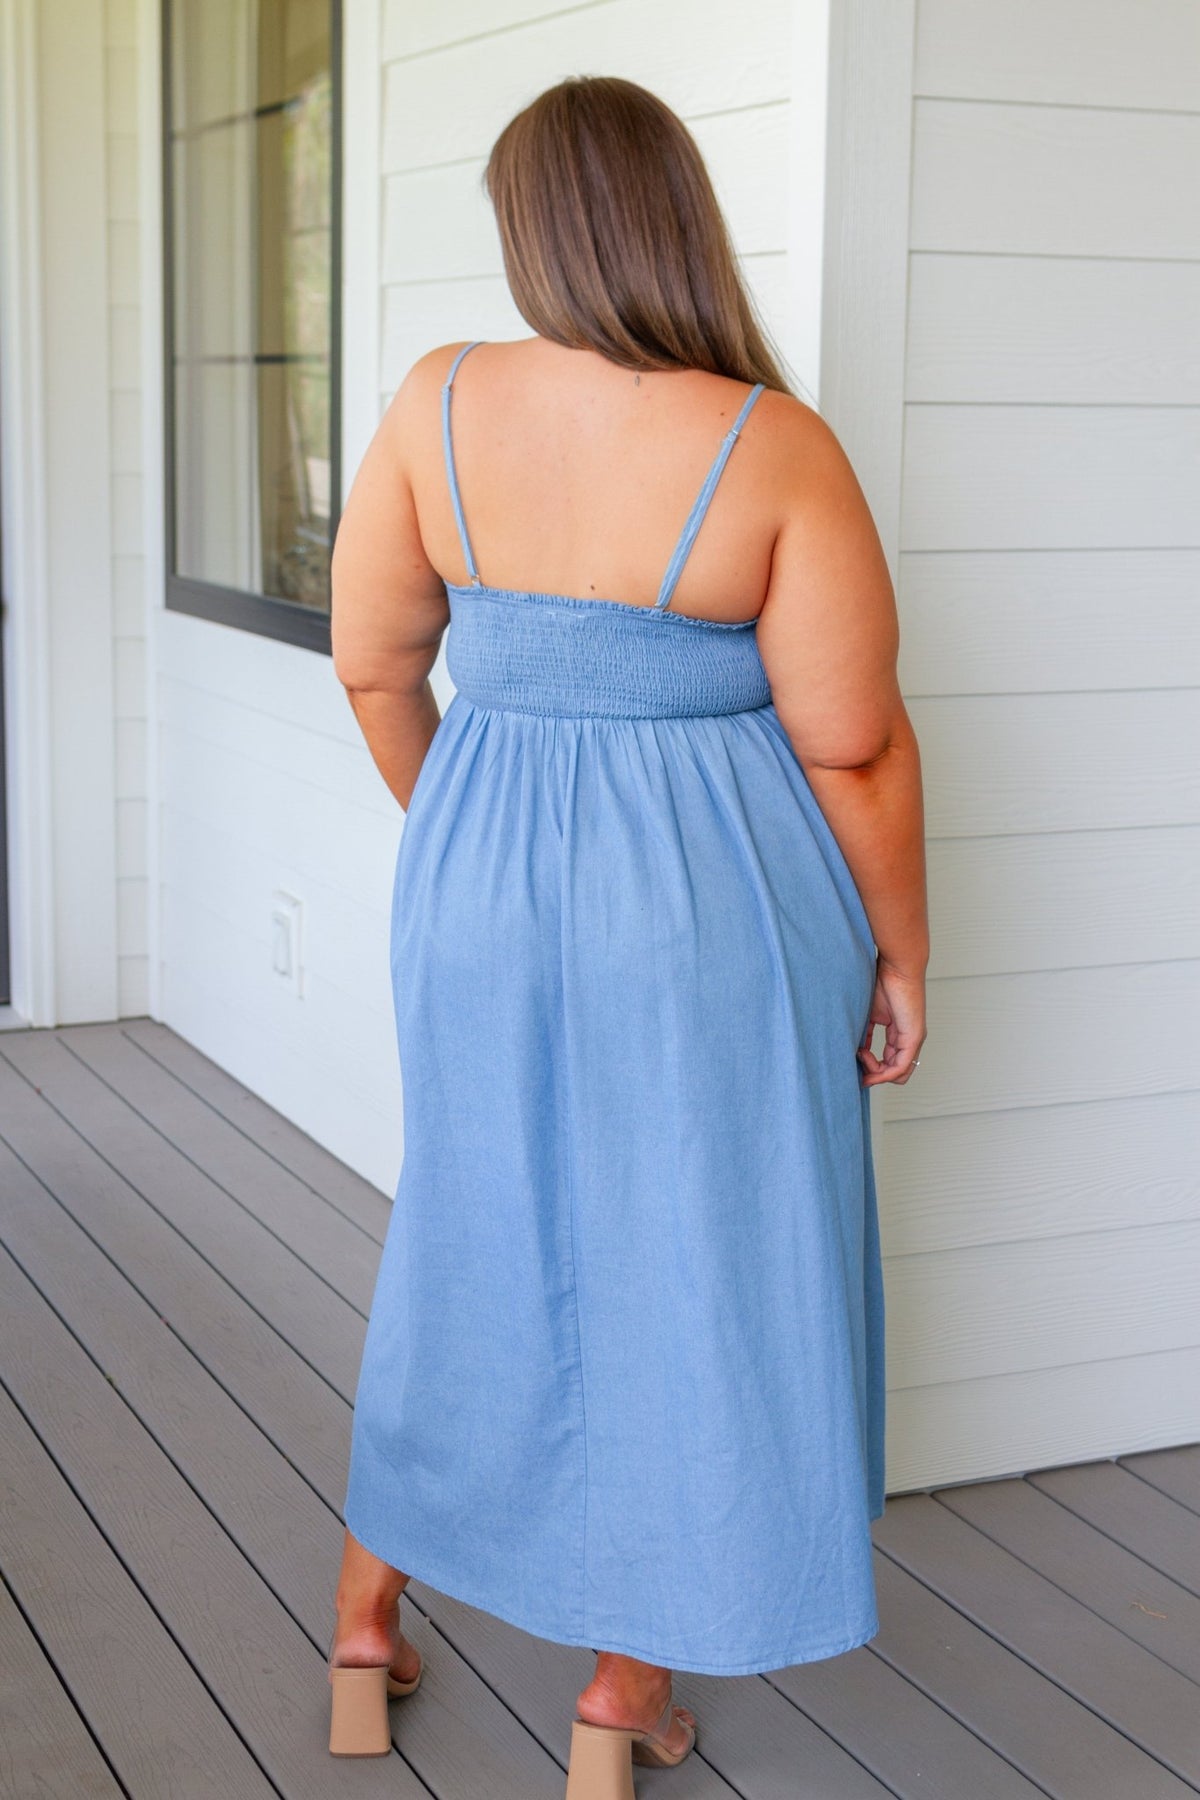 Carolina in My Mind Maxi Dress - Happily Ever Atchison Shop Co.